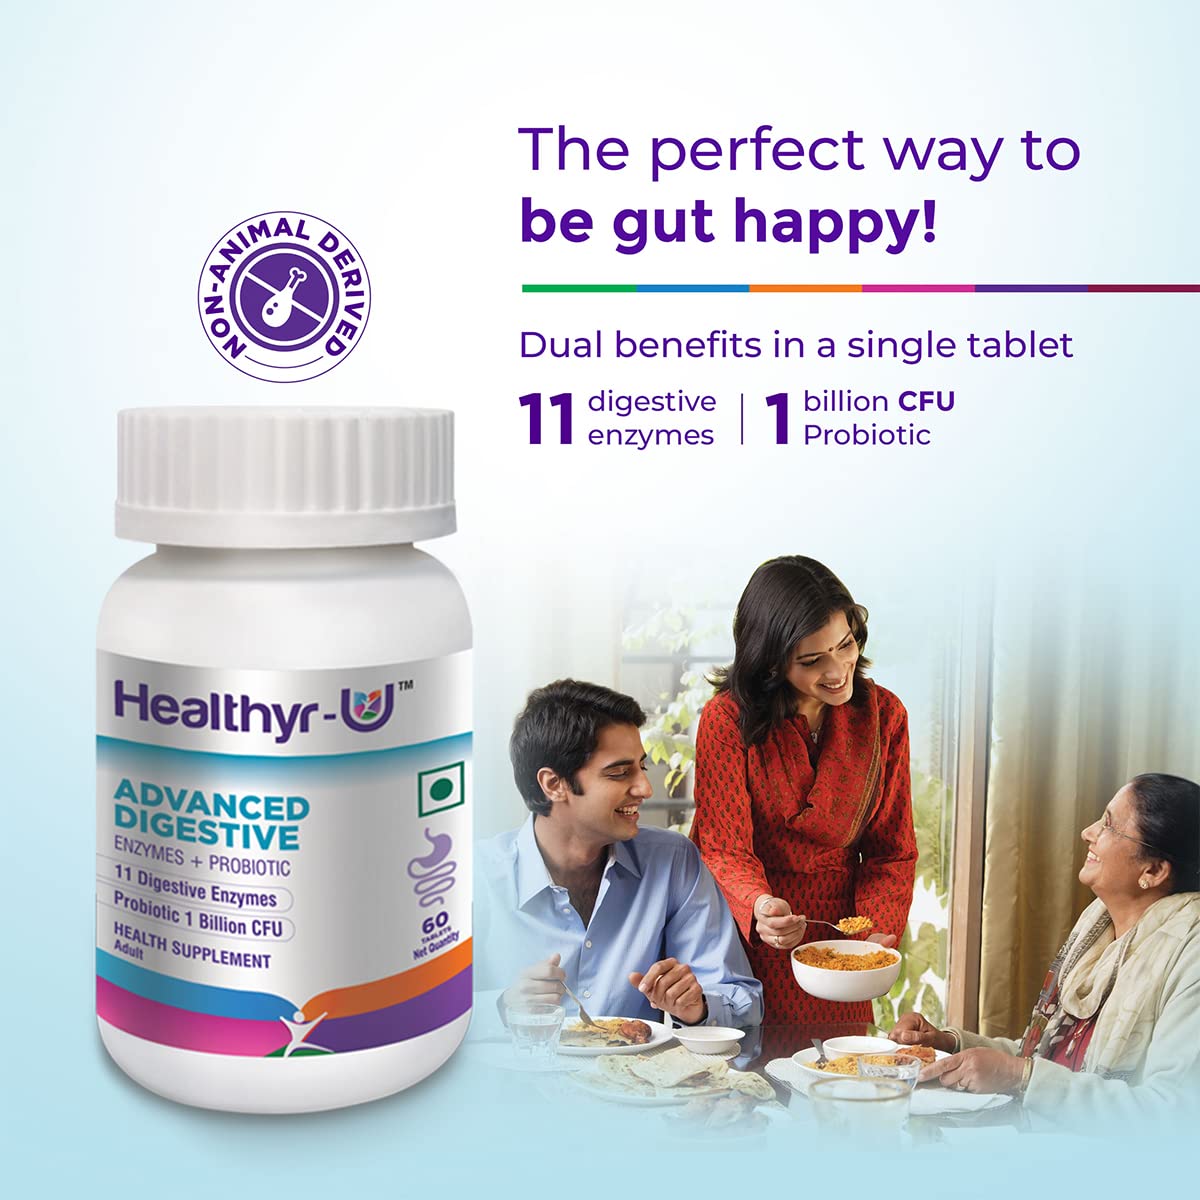 Advanced Digestive Enzymes + Probiotic Tablet